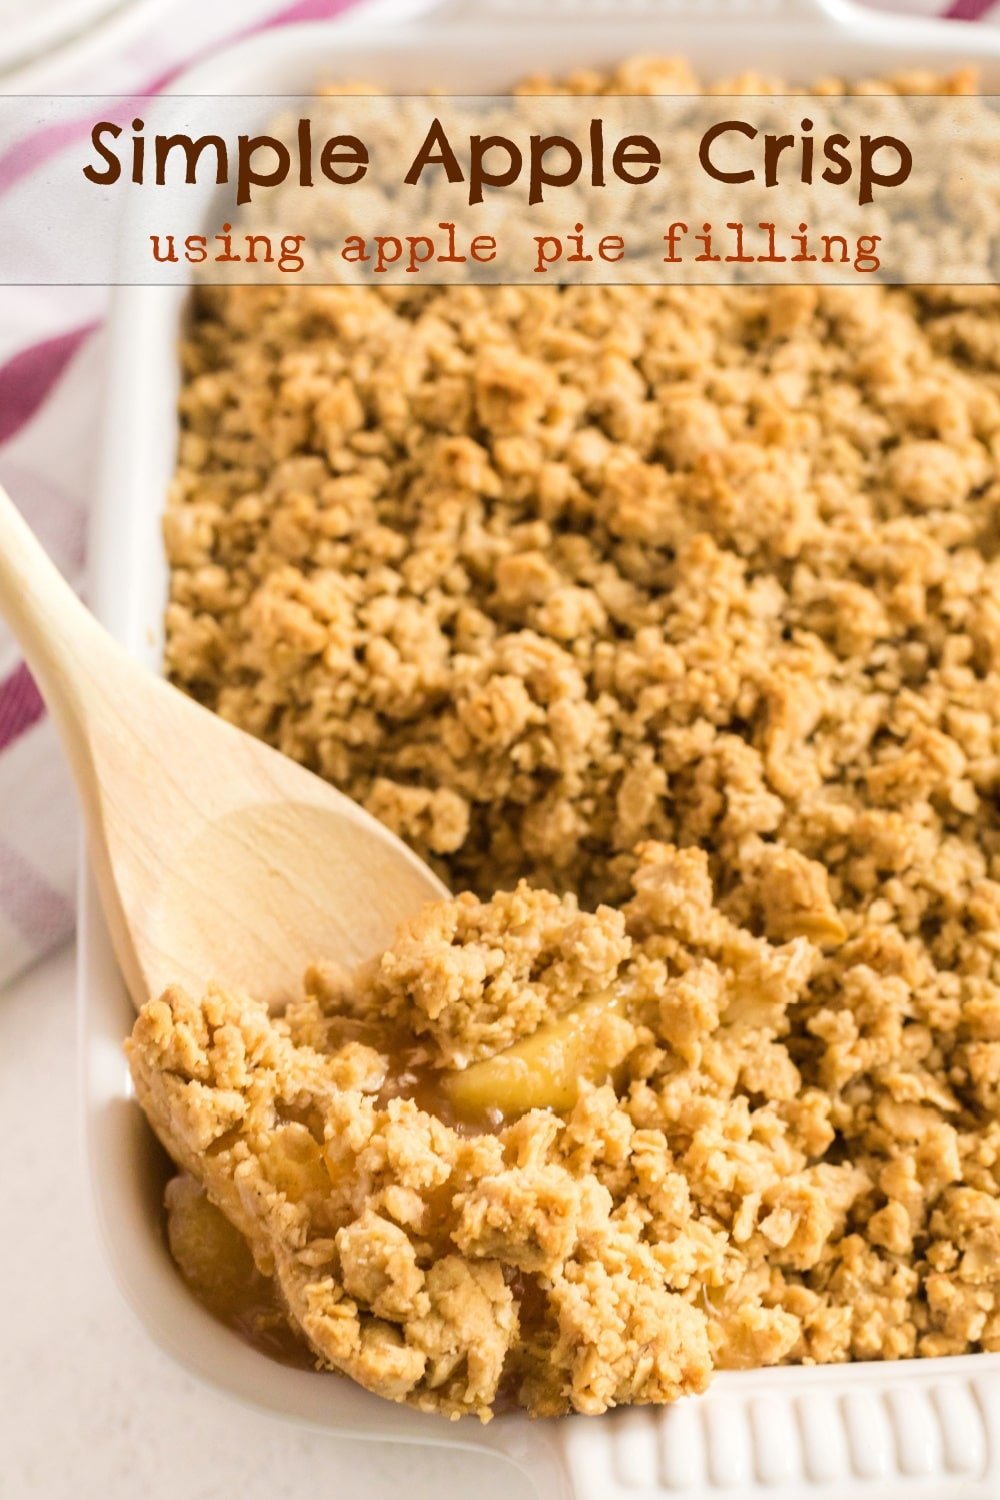 This particular apple crisp is the lazy baker's best friend. Not only will you get all the satisfaction and flavor of apple pie, this simple apple crisp is going to be ready in half the time. Warmly spiced apple pie filling is topped with sweet, buttery oats that crack under the pressure of a spoon. Don't forget a scoop of vanilla ice cream on top. via @cmpollak1